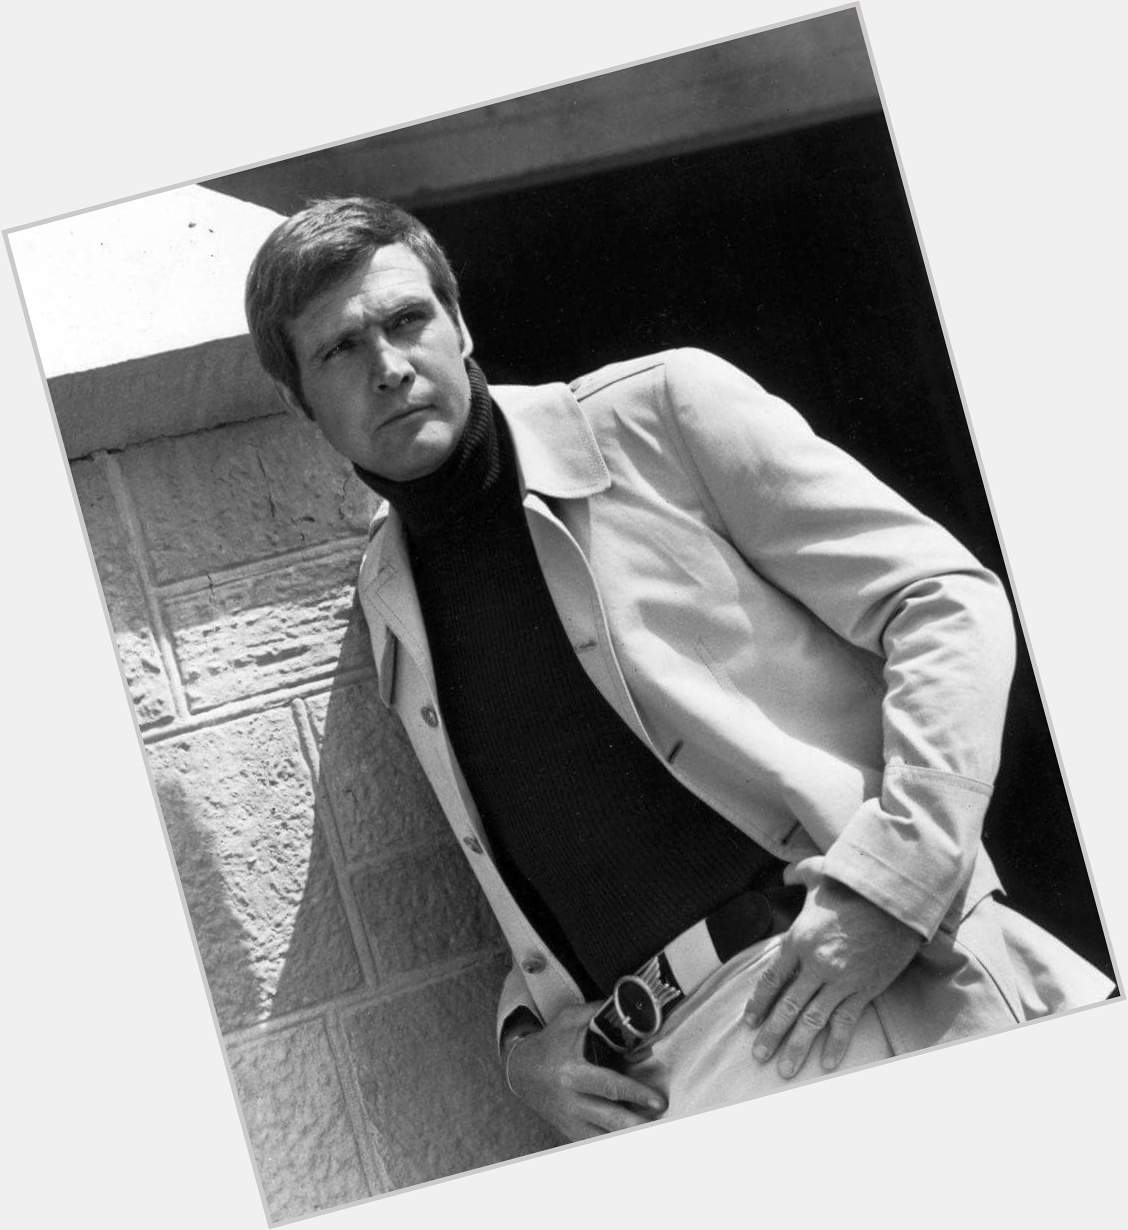 Happy Birthday to Lee Majors who turns 79 today! 